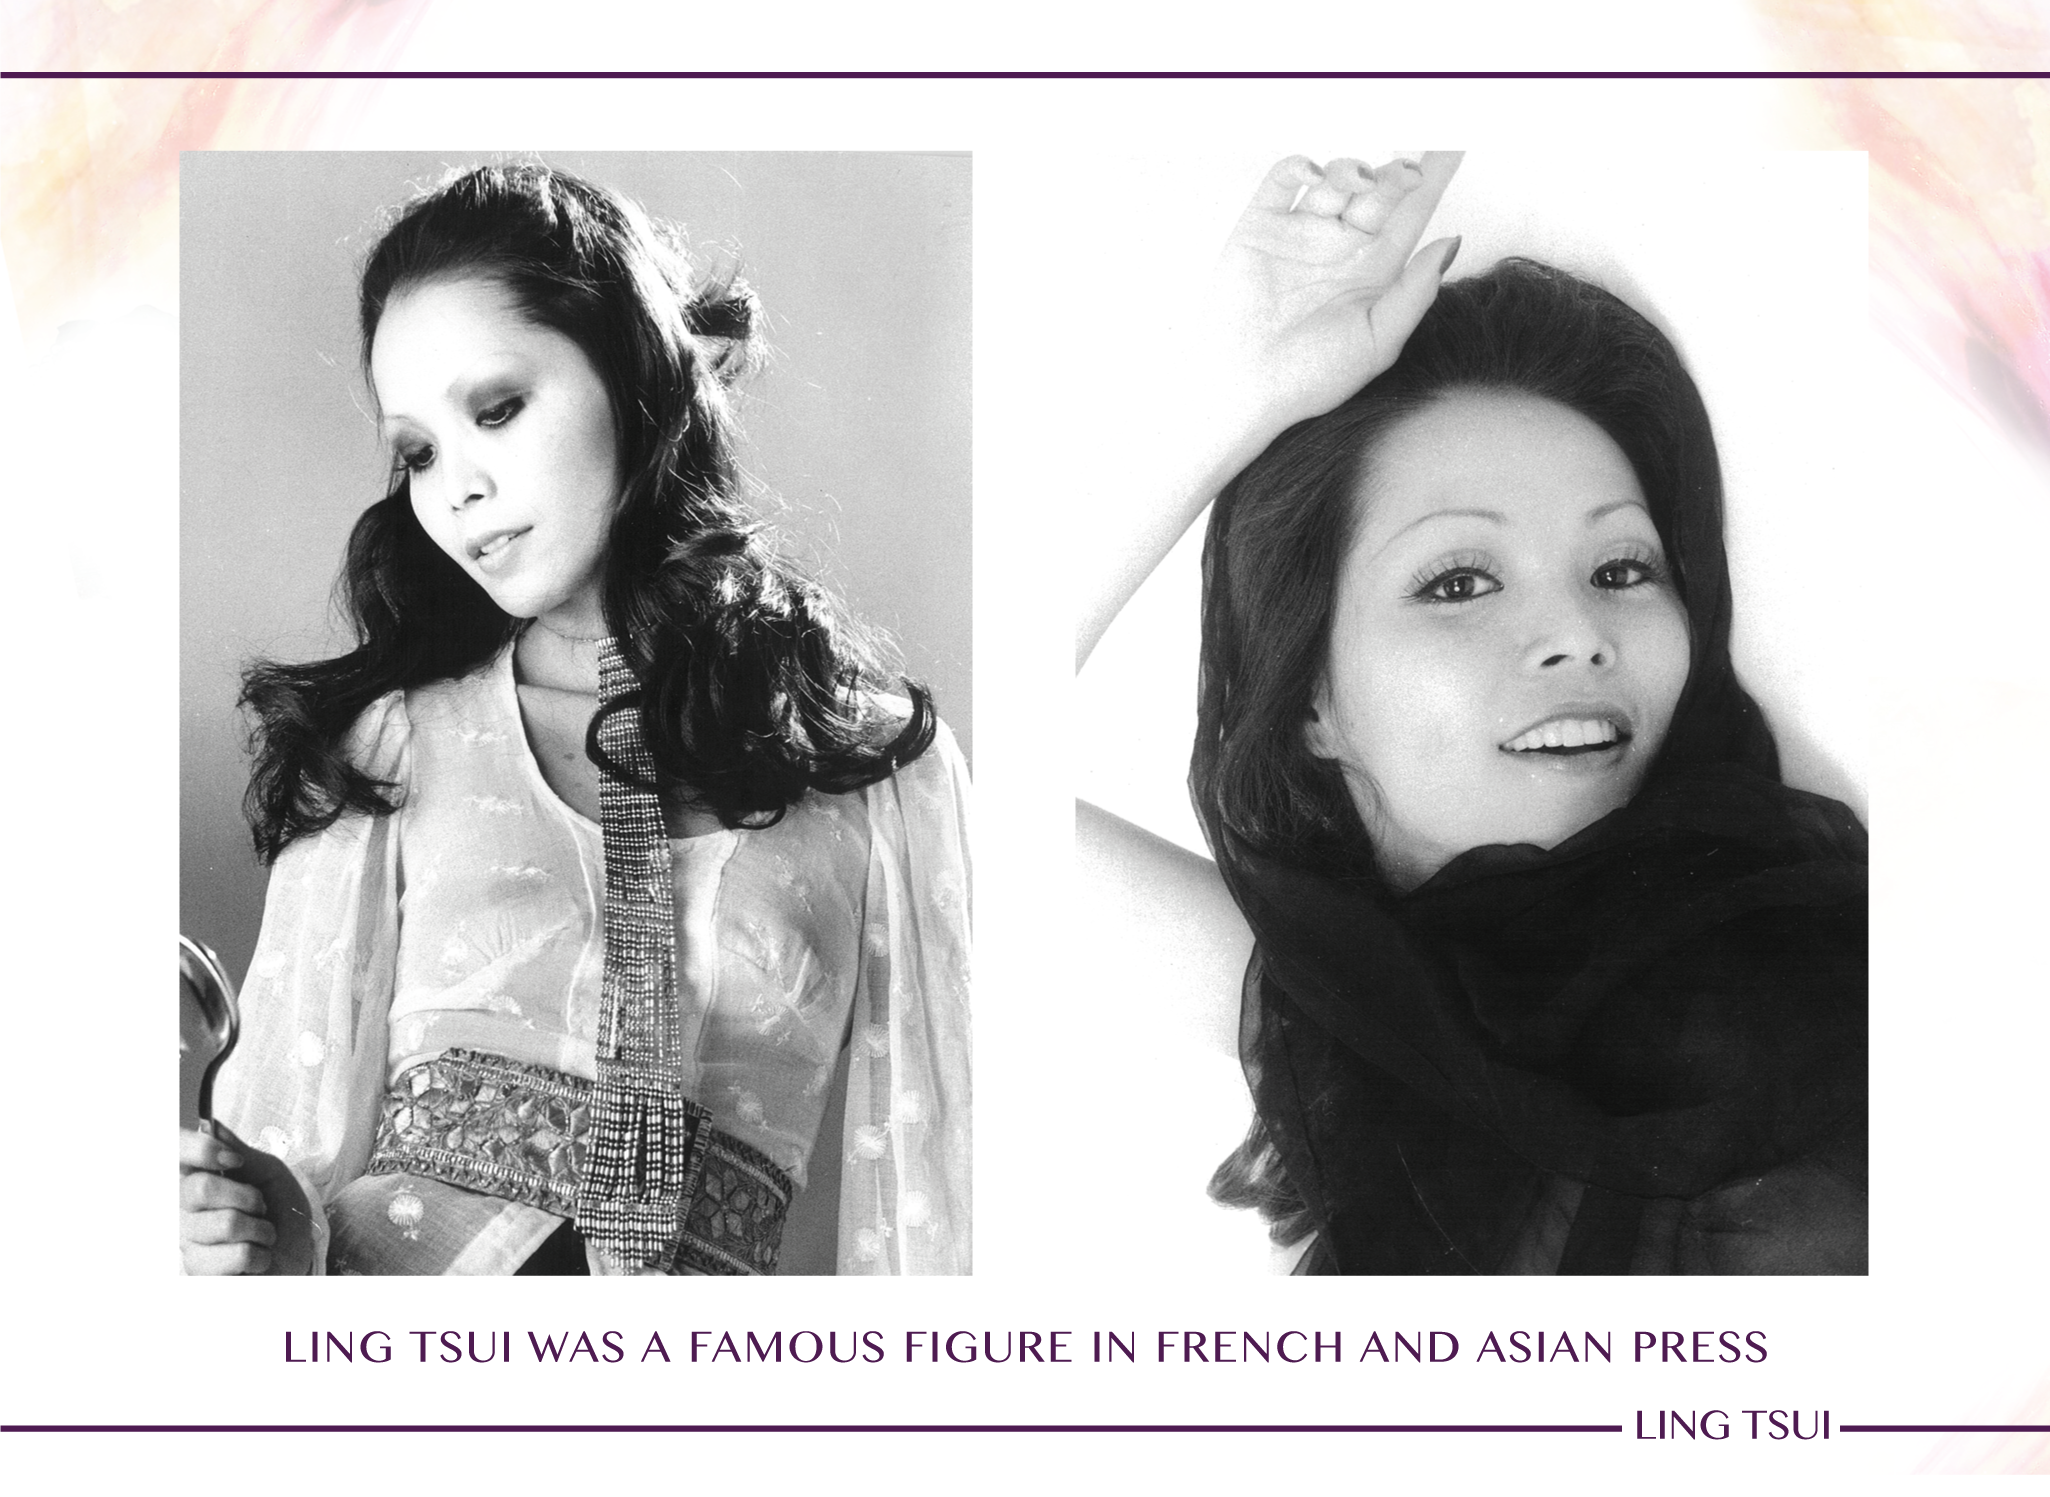 LING TSUI WAS A FAMOUS FIGURE IN FRENCH AND ASIAN PRESS